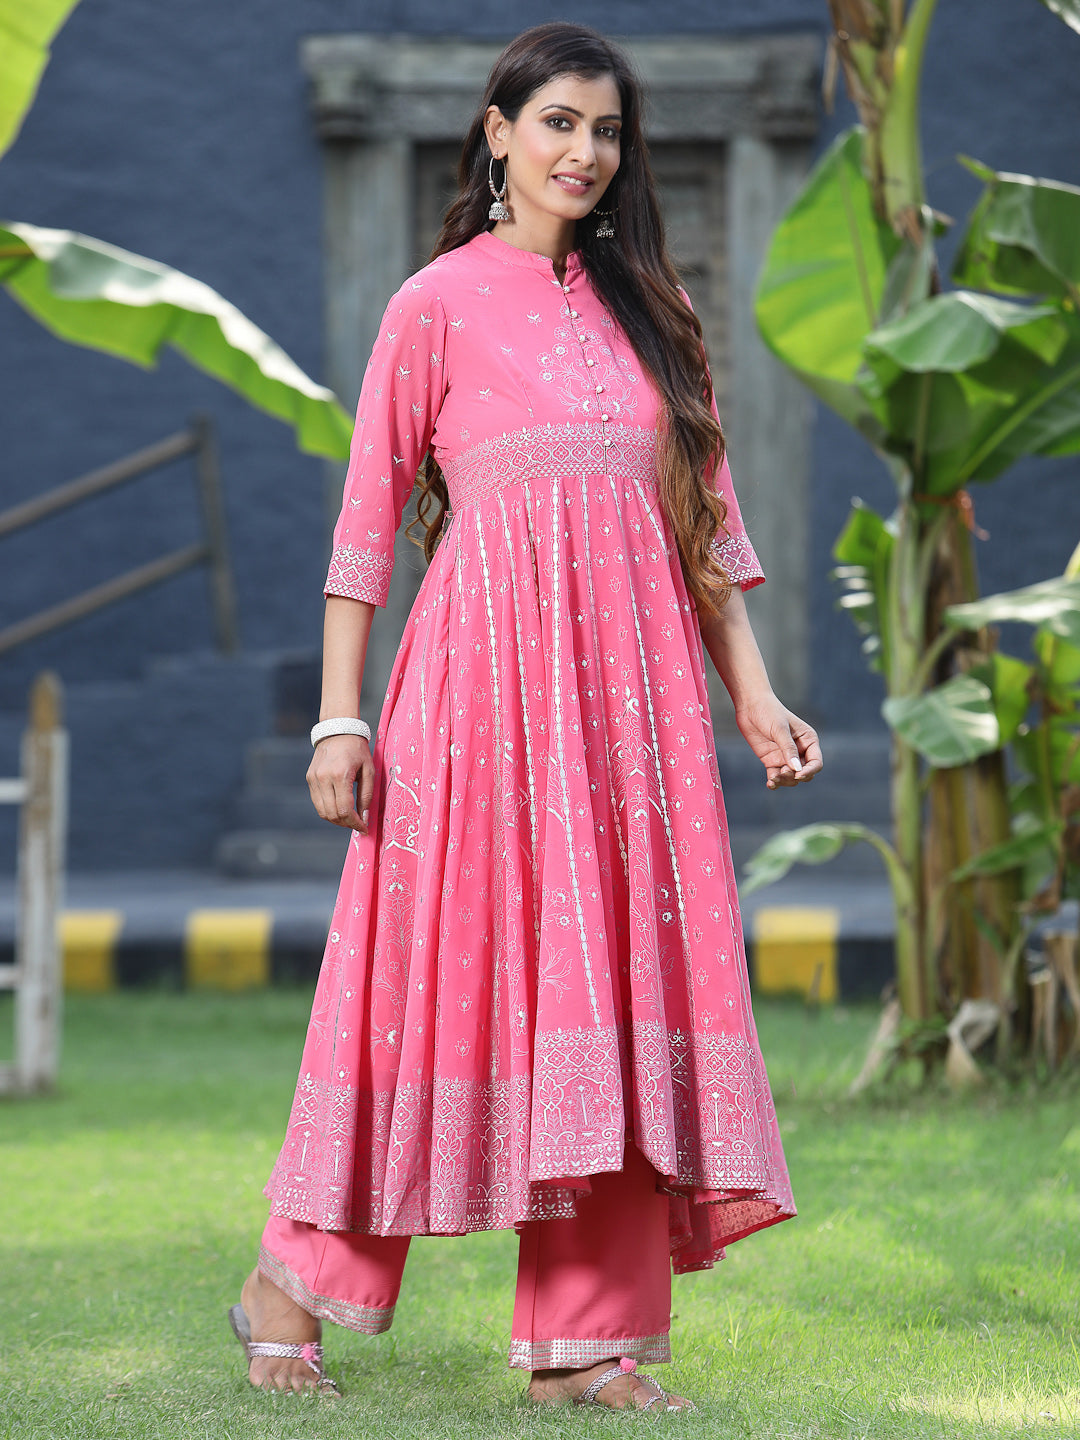 Juniper Coral Ethnic Motif Printed Georgette Anarkali Kurta & Palazzo Set With Buttons